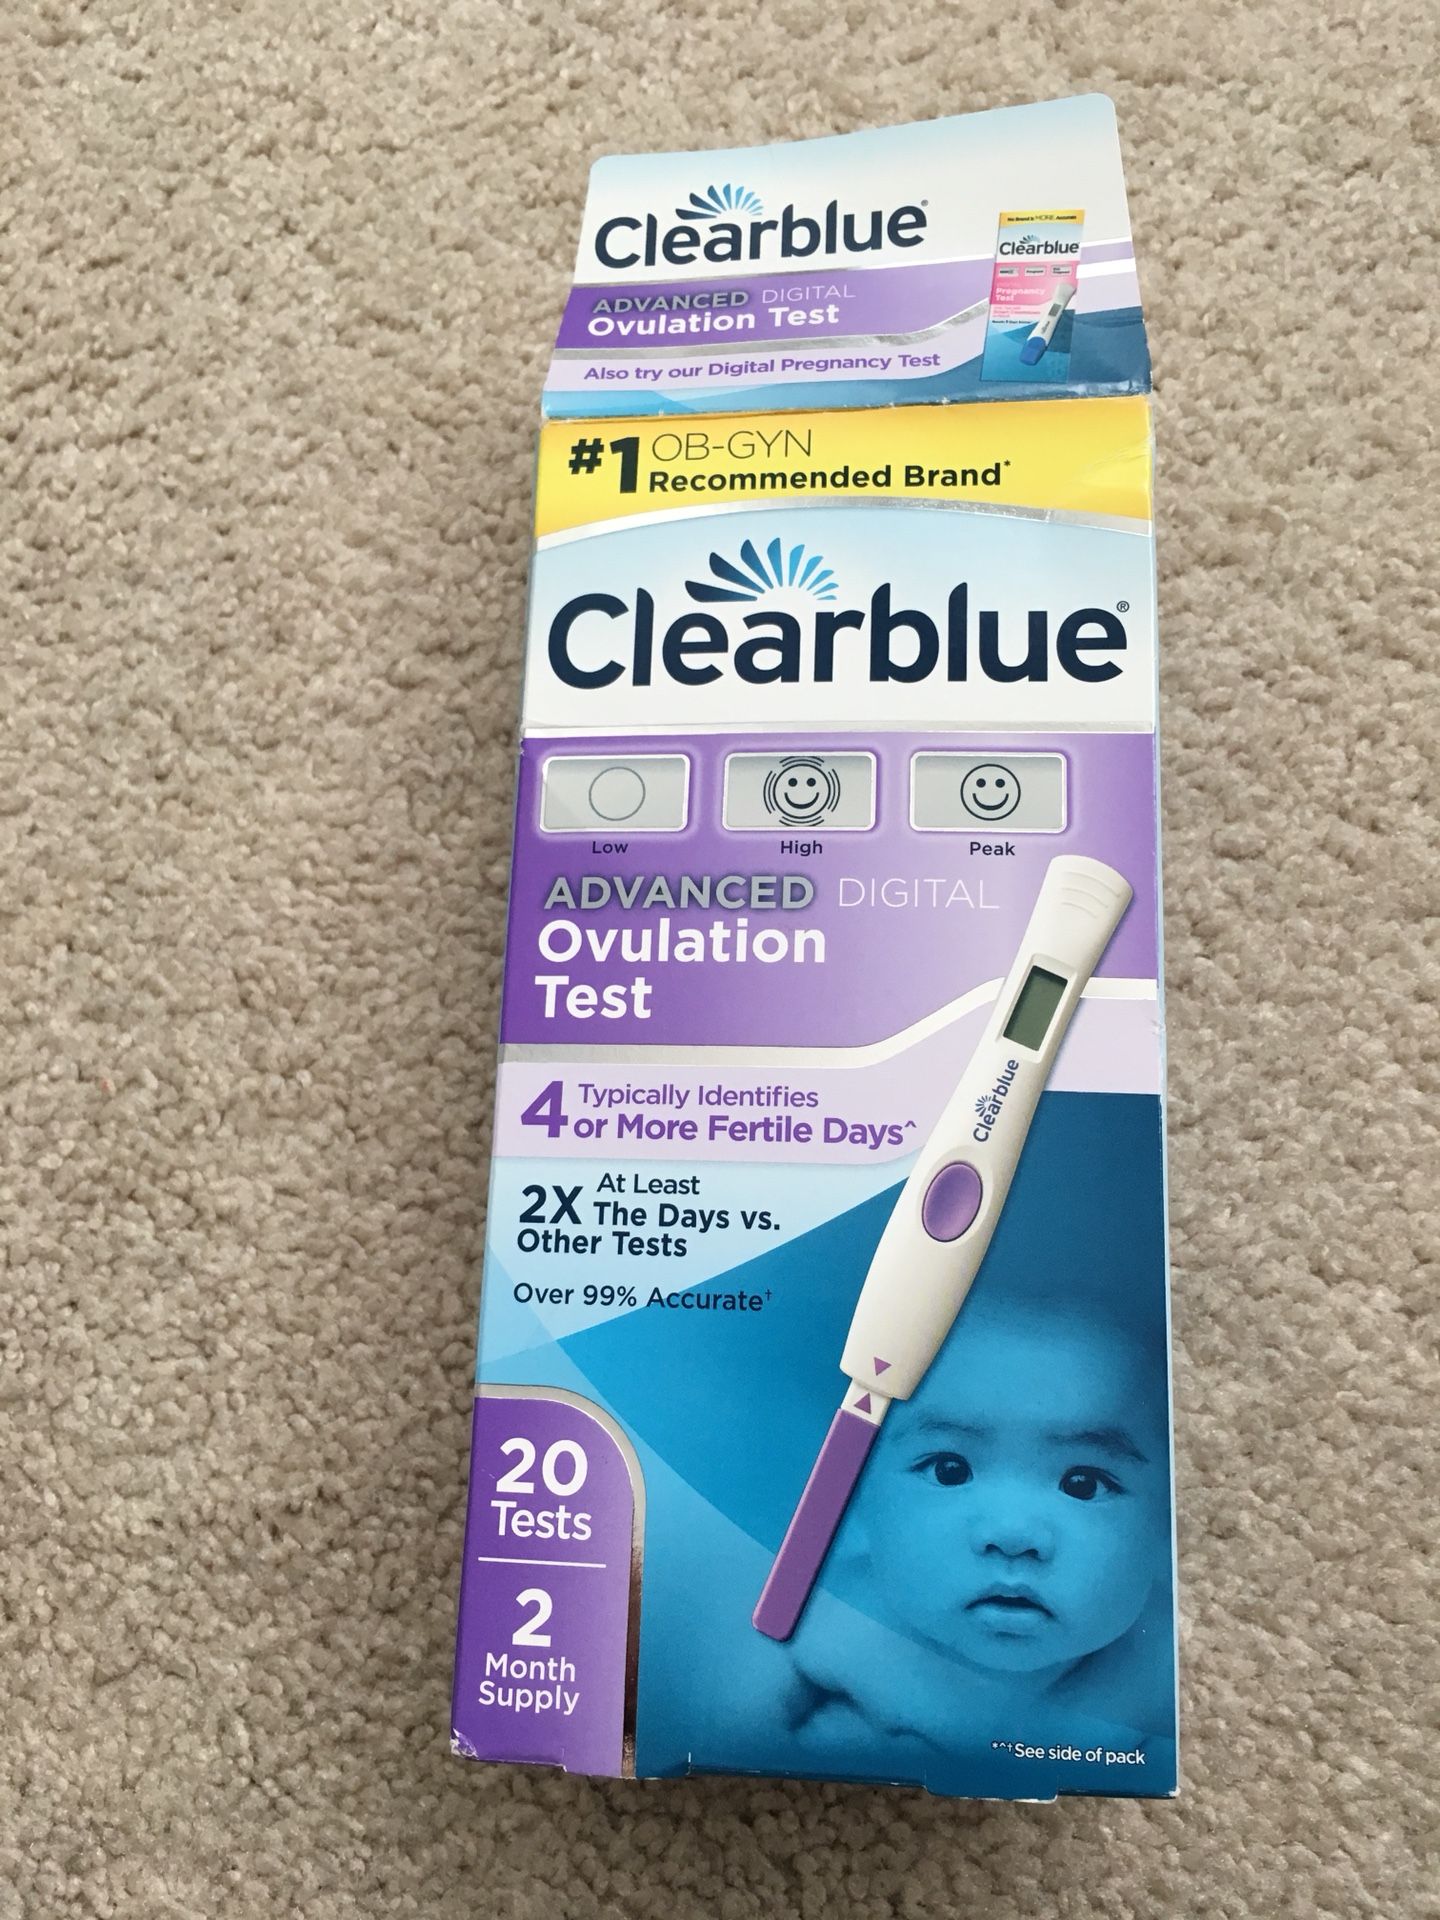 Clearblue Ovulation Test kit